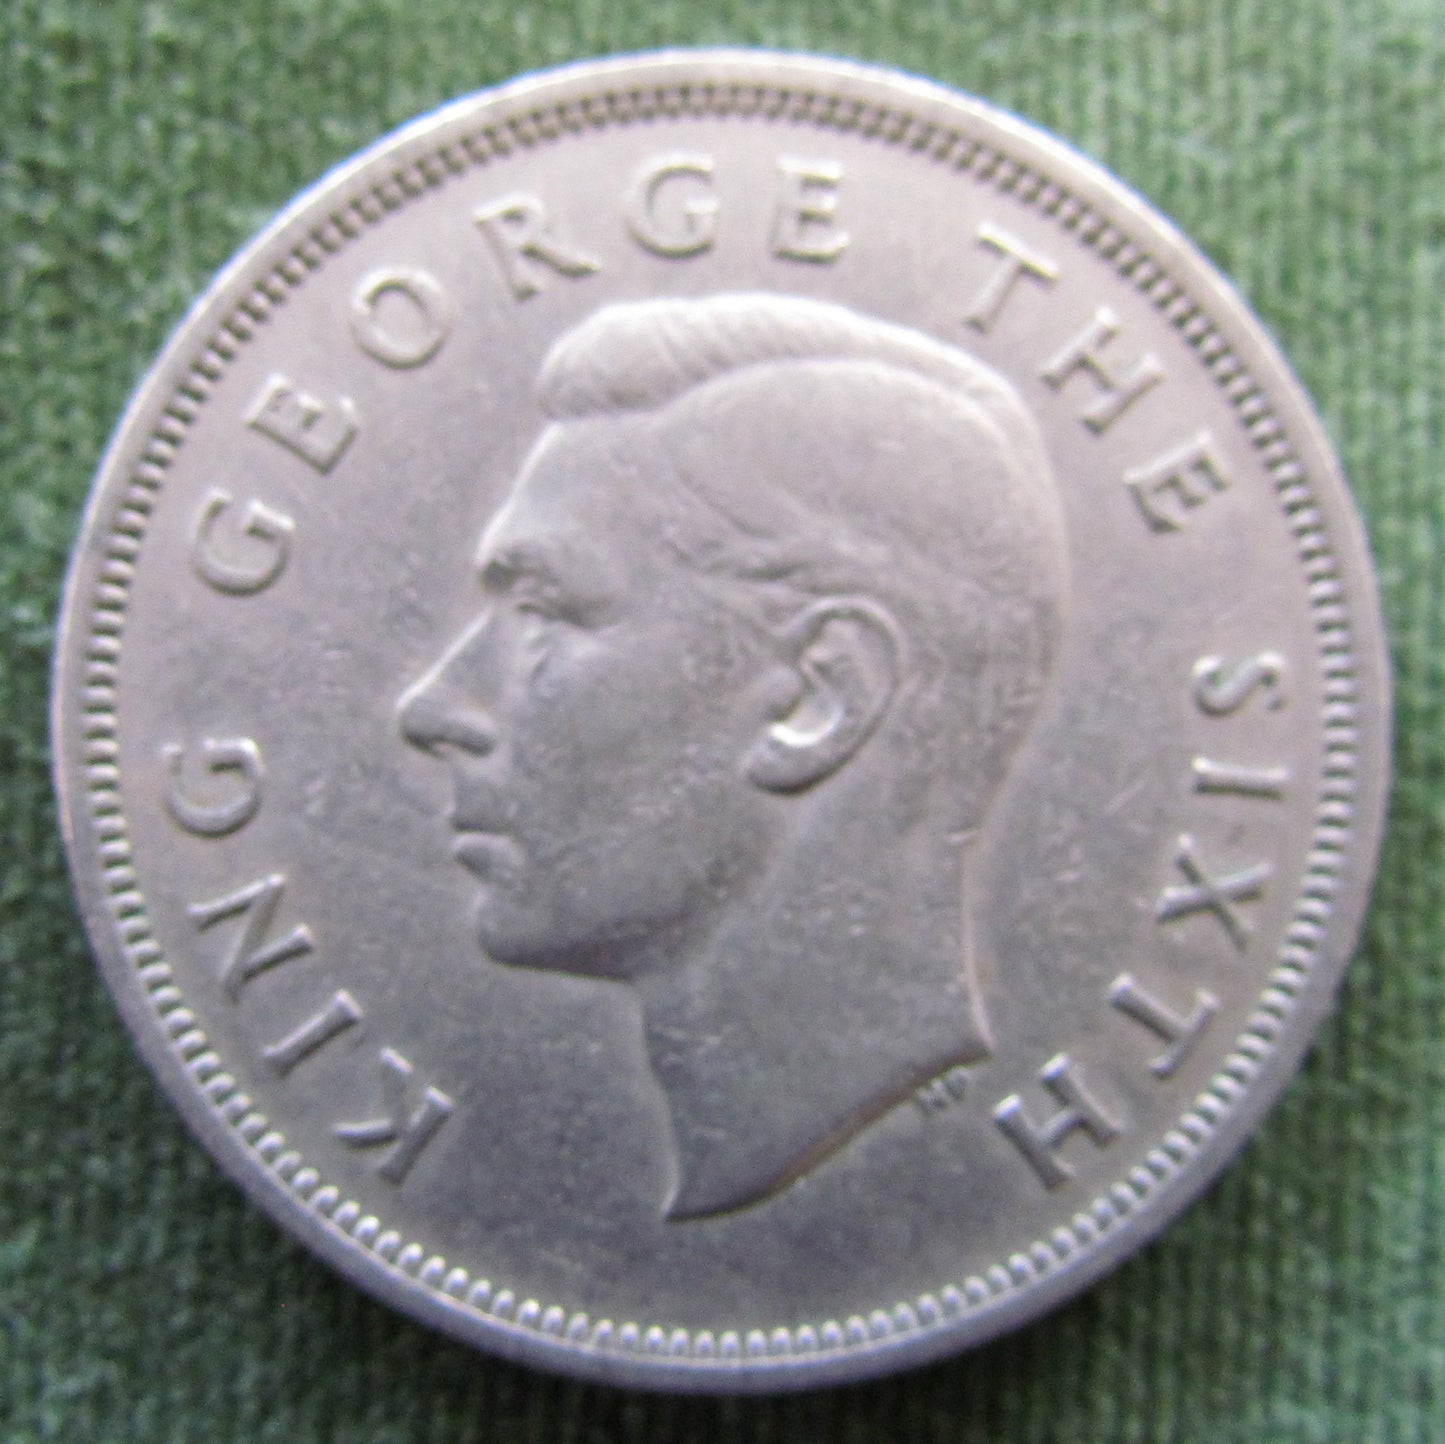 New Zealand 1948 Half Crown King George VI Coin - Circulated